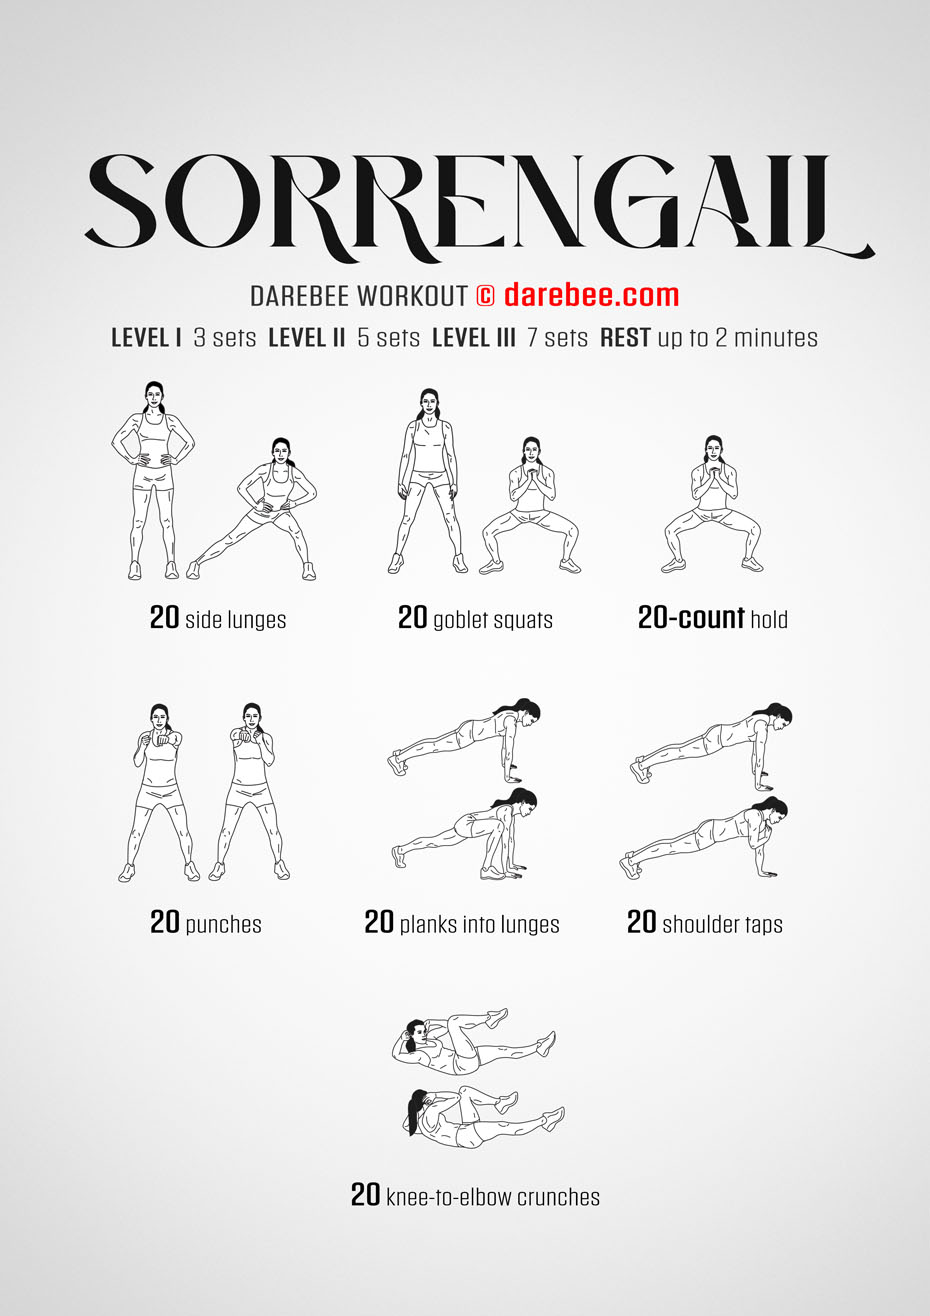 Sorrengail is a DAREBEE home fitness total body, no-equipment strength workout that helps you develop total body strength without equipment, at home.